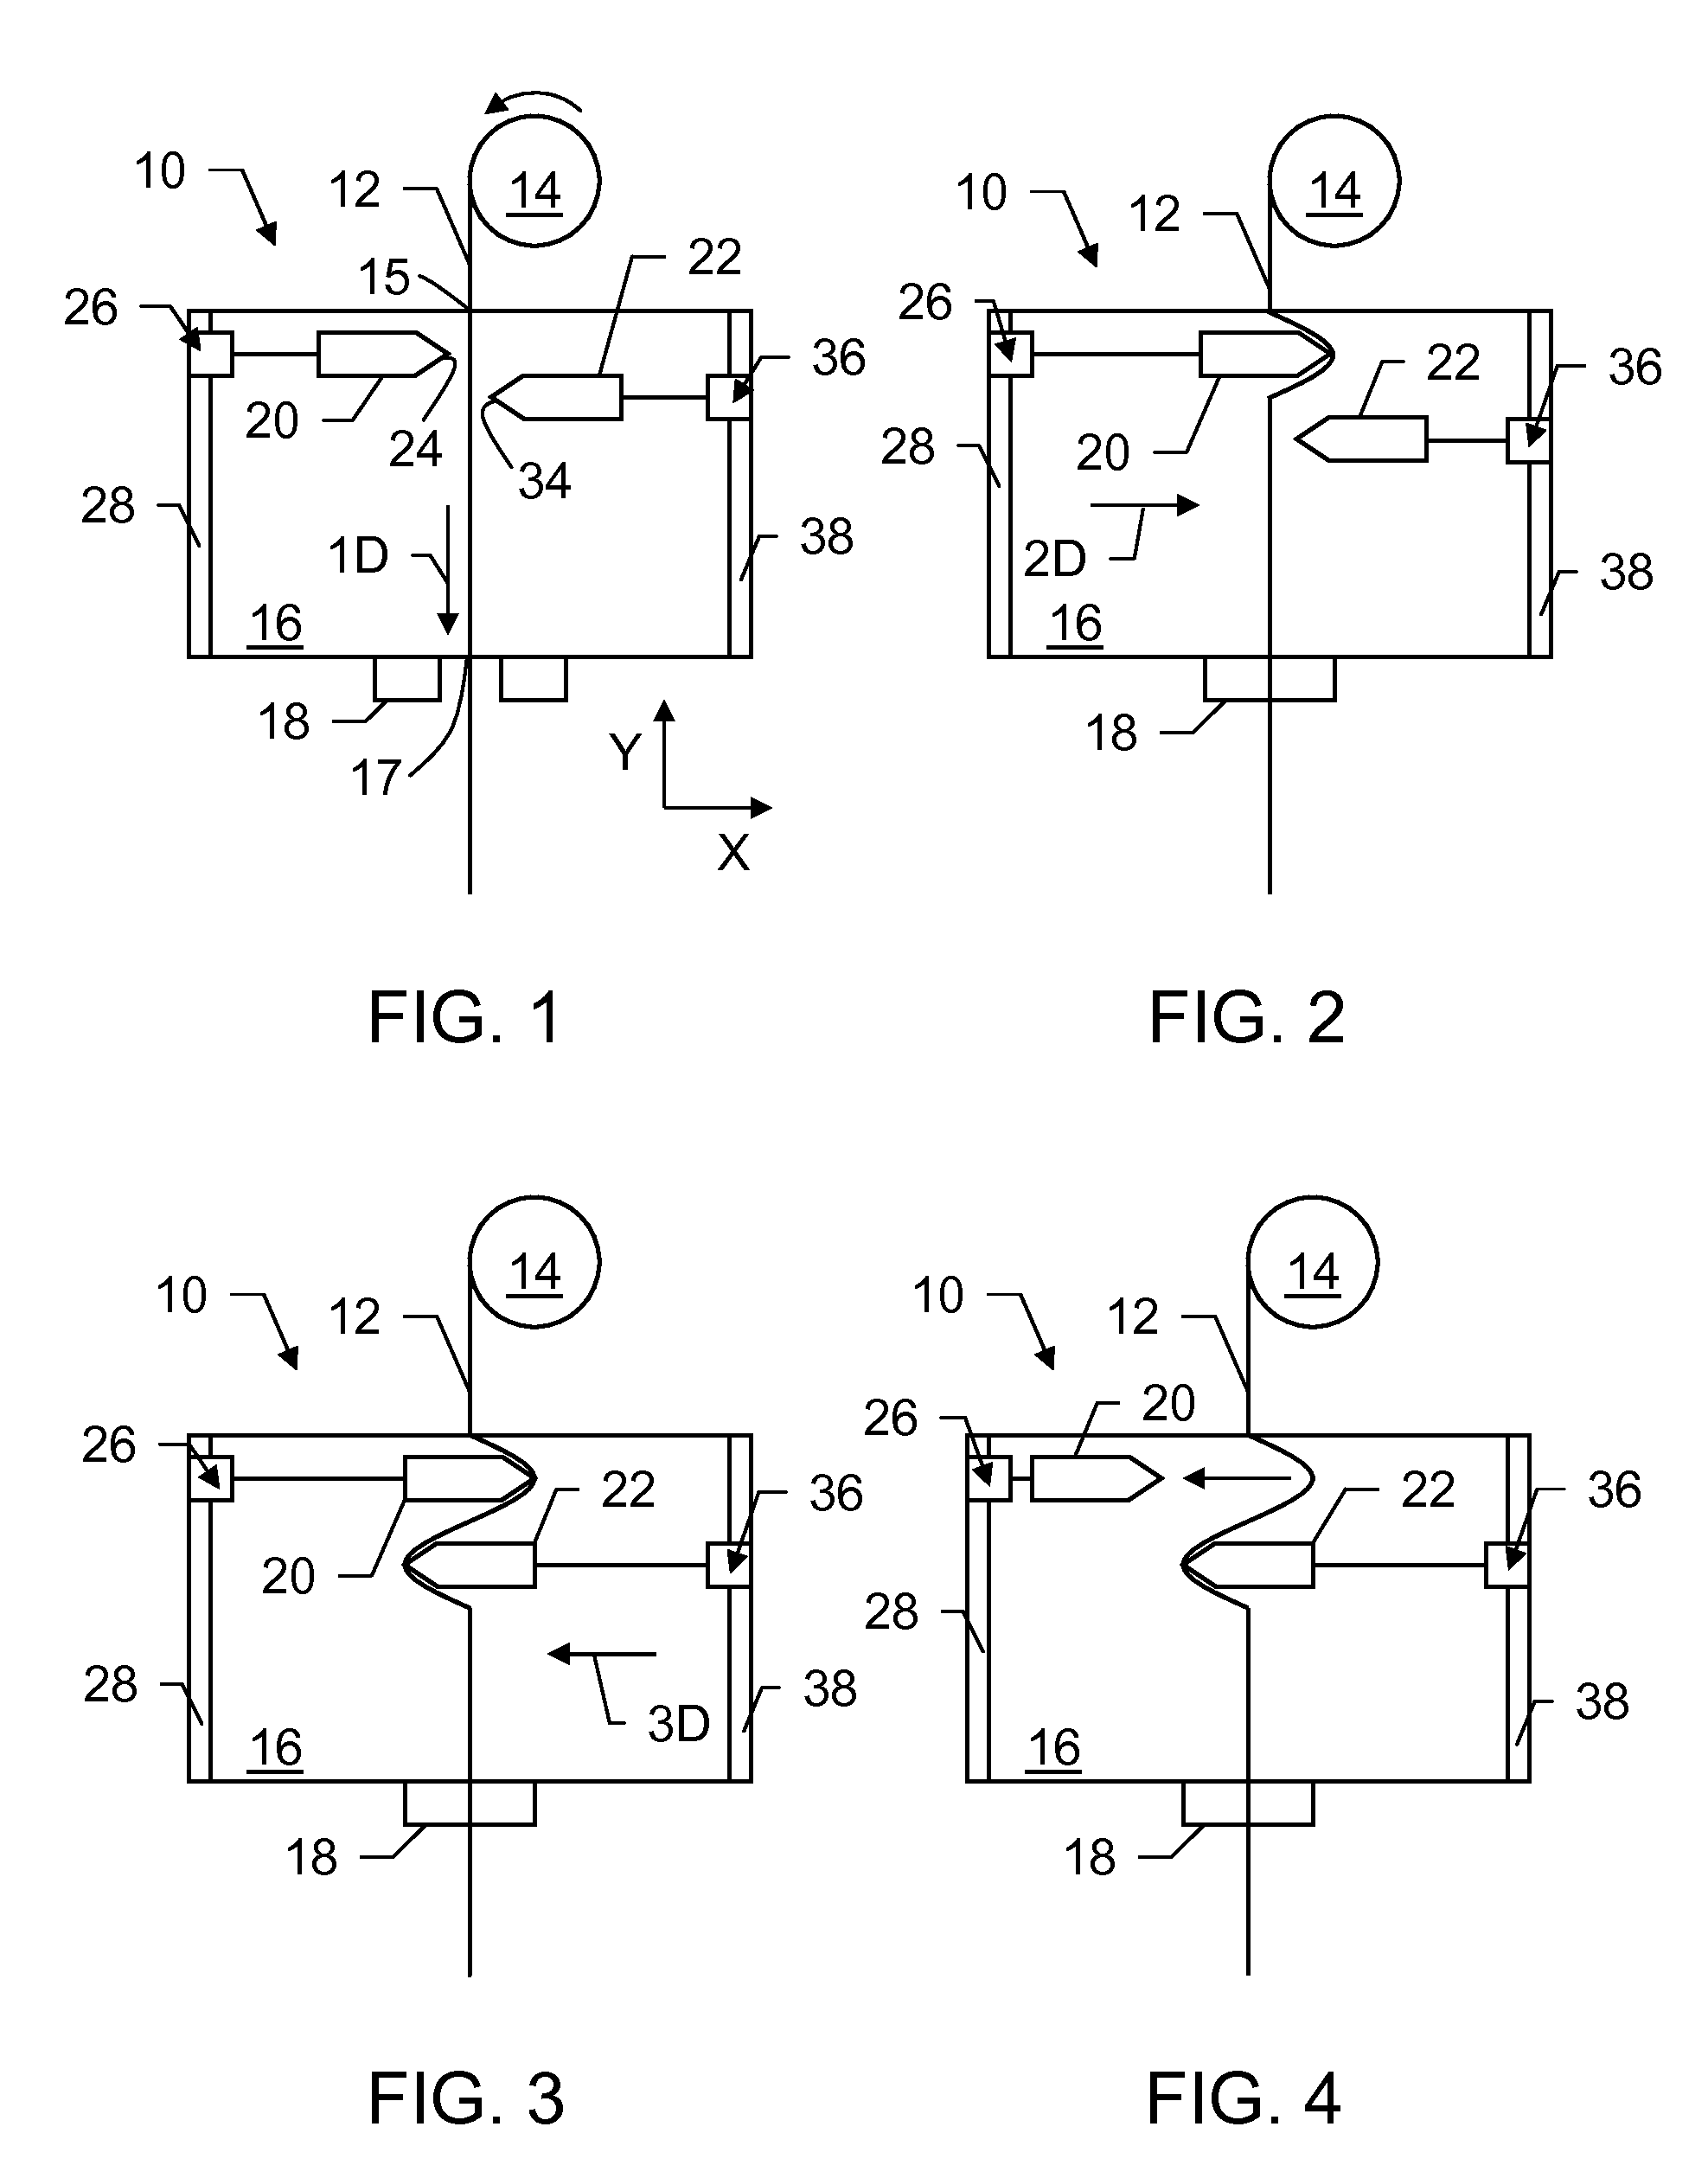 Apparatus and Method for Forming a Wave Form for a Stent From a Wire